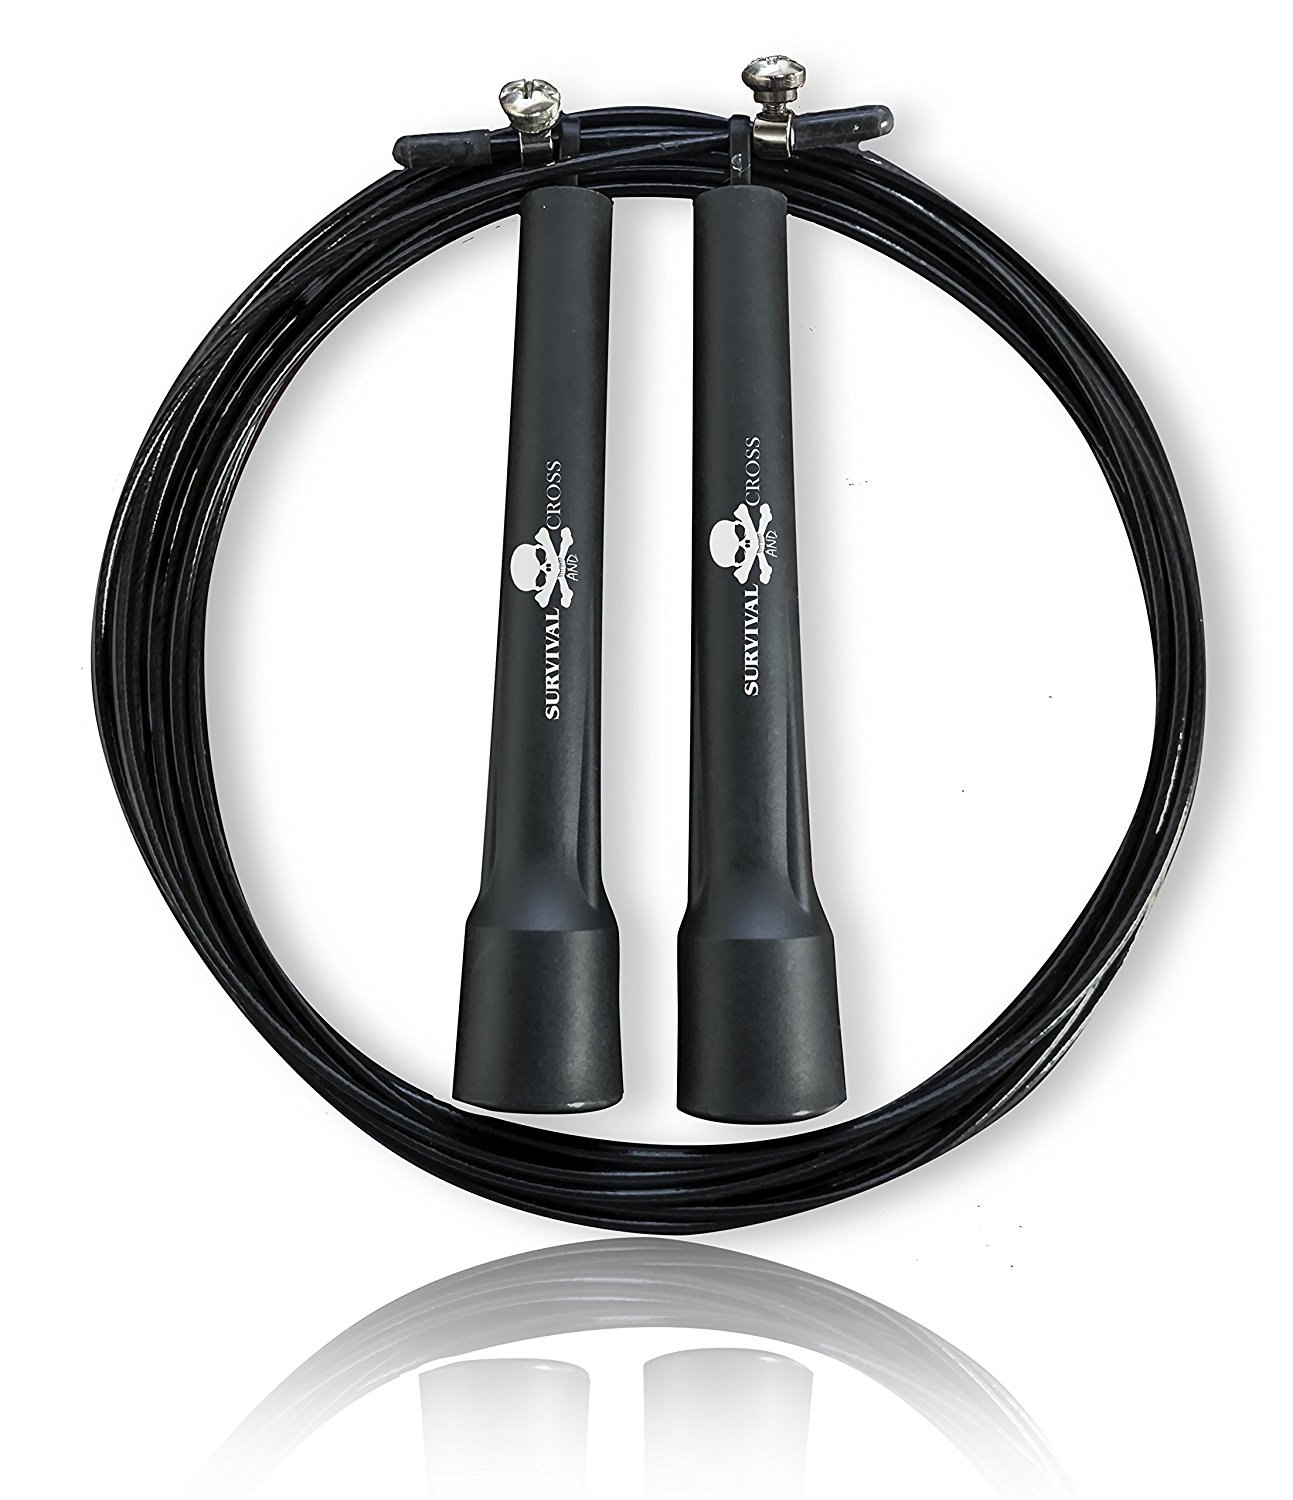 10 Reasons Why Jumping Rope Burns Fat Faster Than Any Other Form Of Cardio